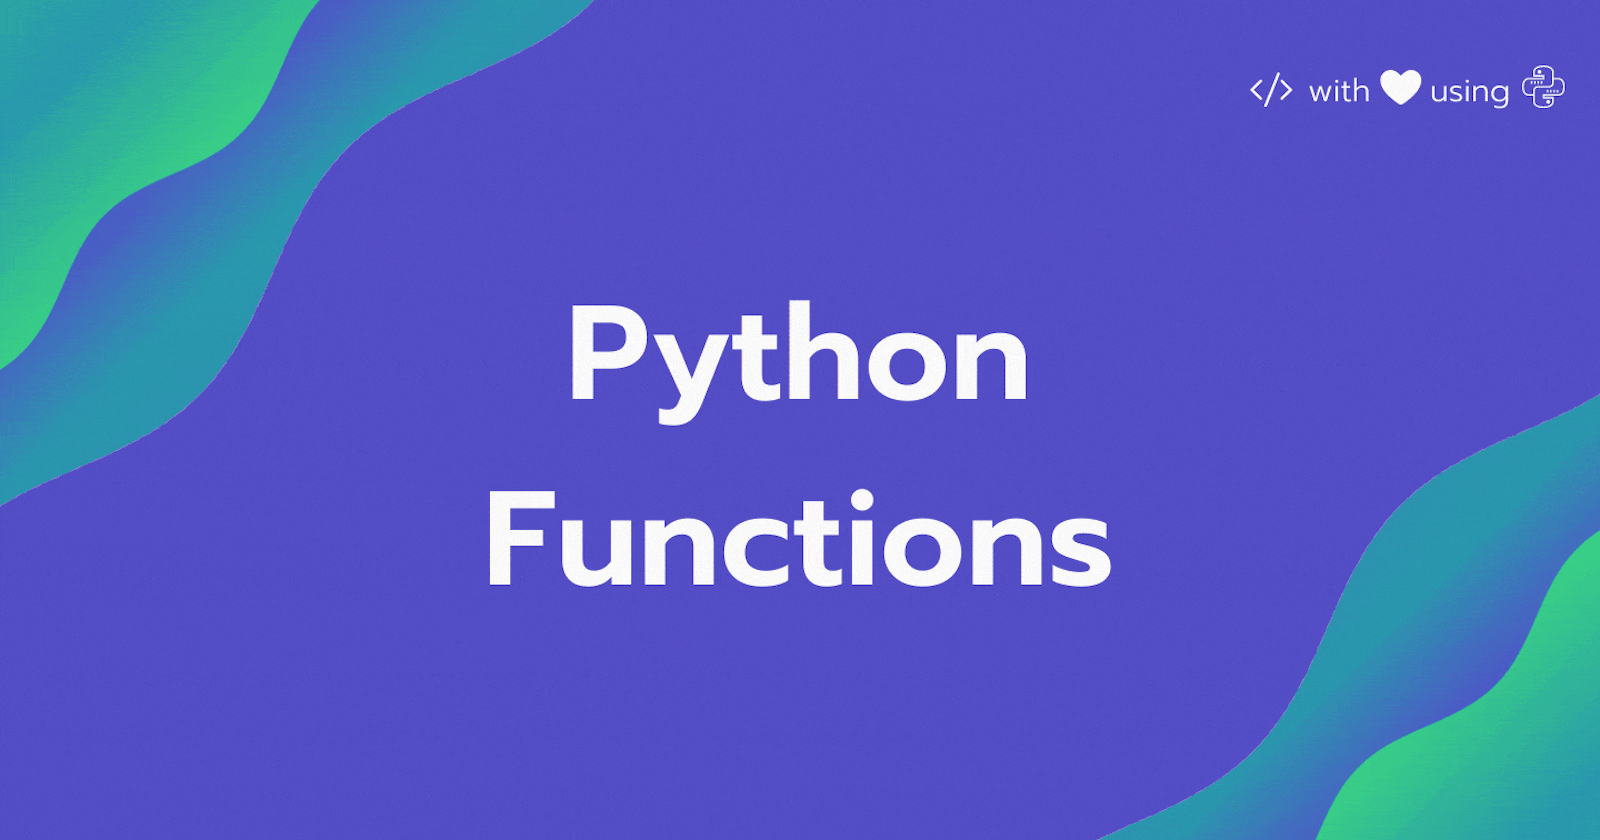 Defining functions in python